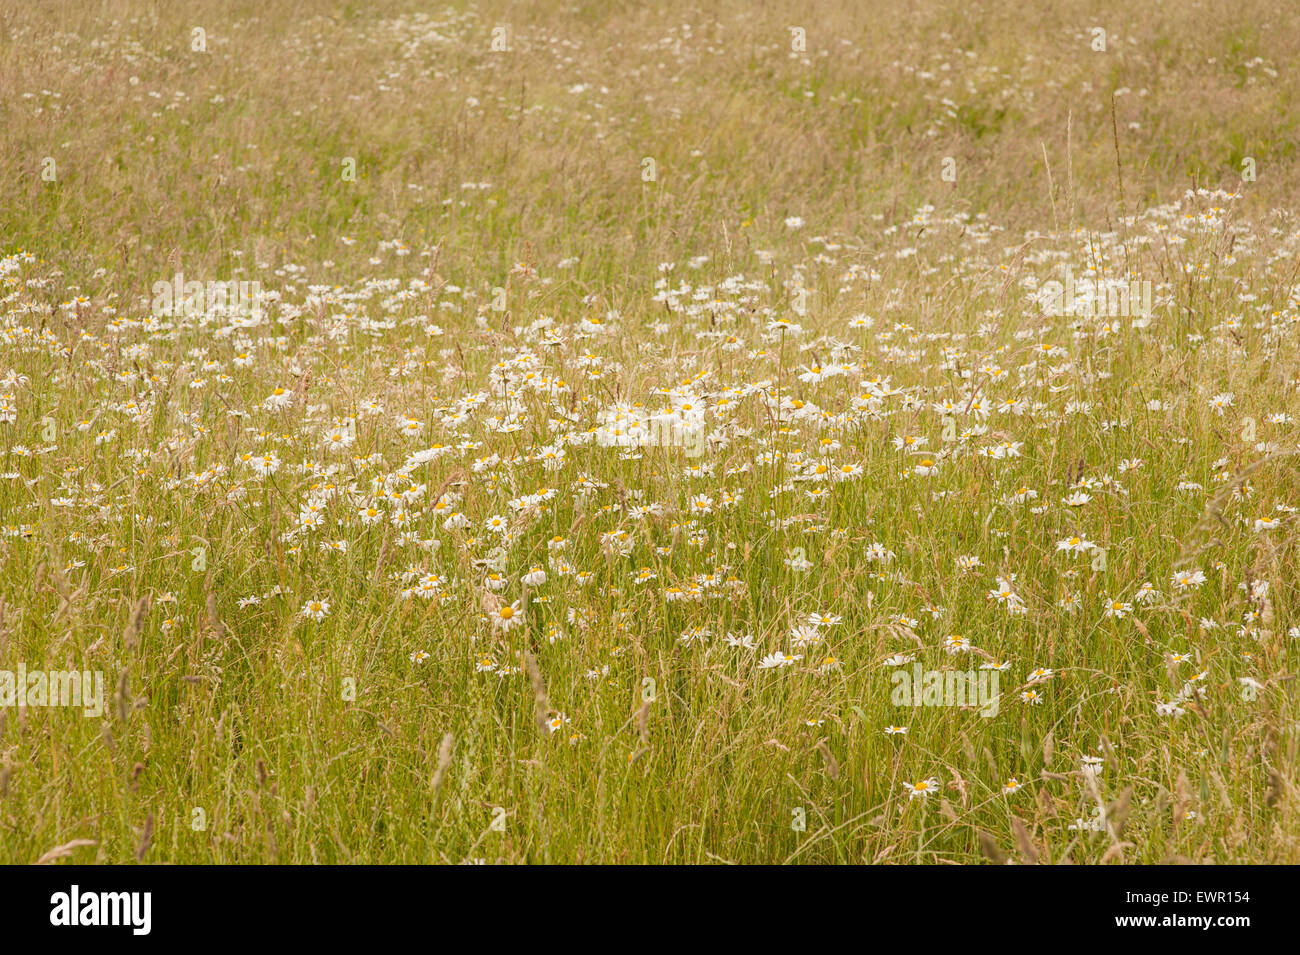 Daises  growing in mid summer meadow in UK image only has tall grass and daises visible taken late afternoon Stock Photo